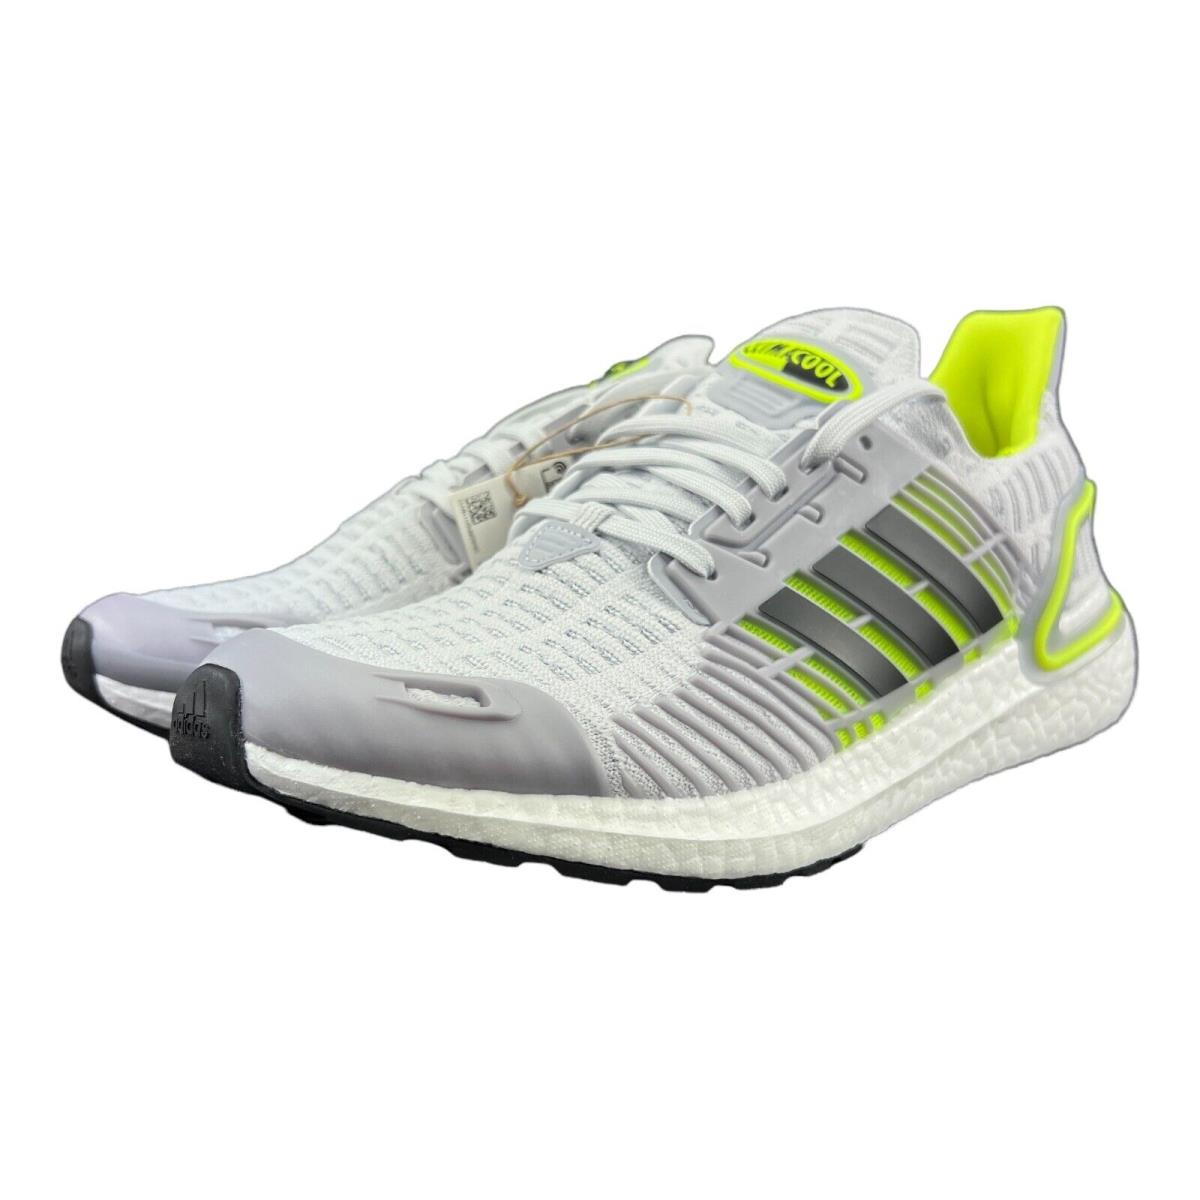 Adidas shoes UltraBoost DNA - Gray 3